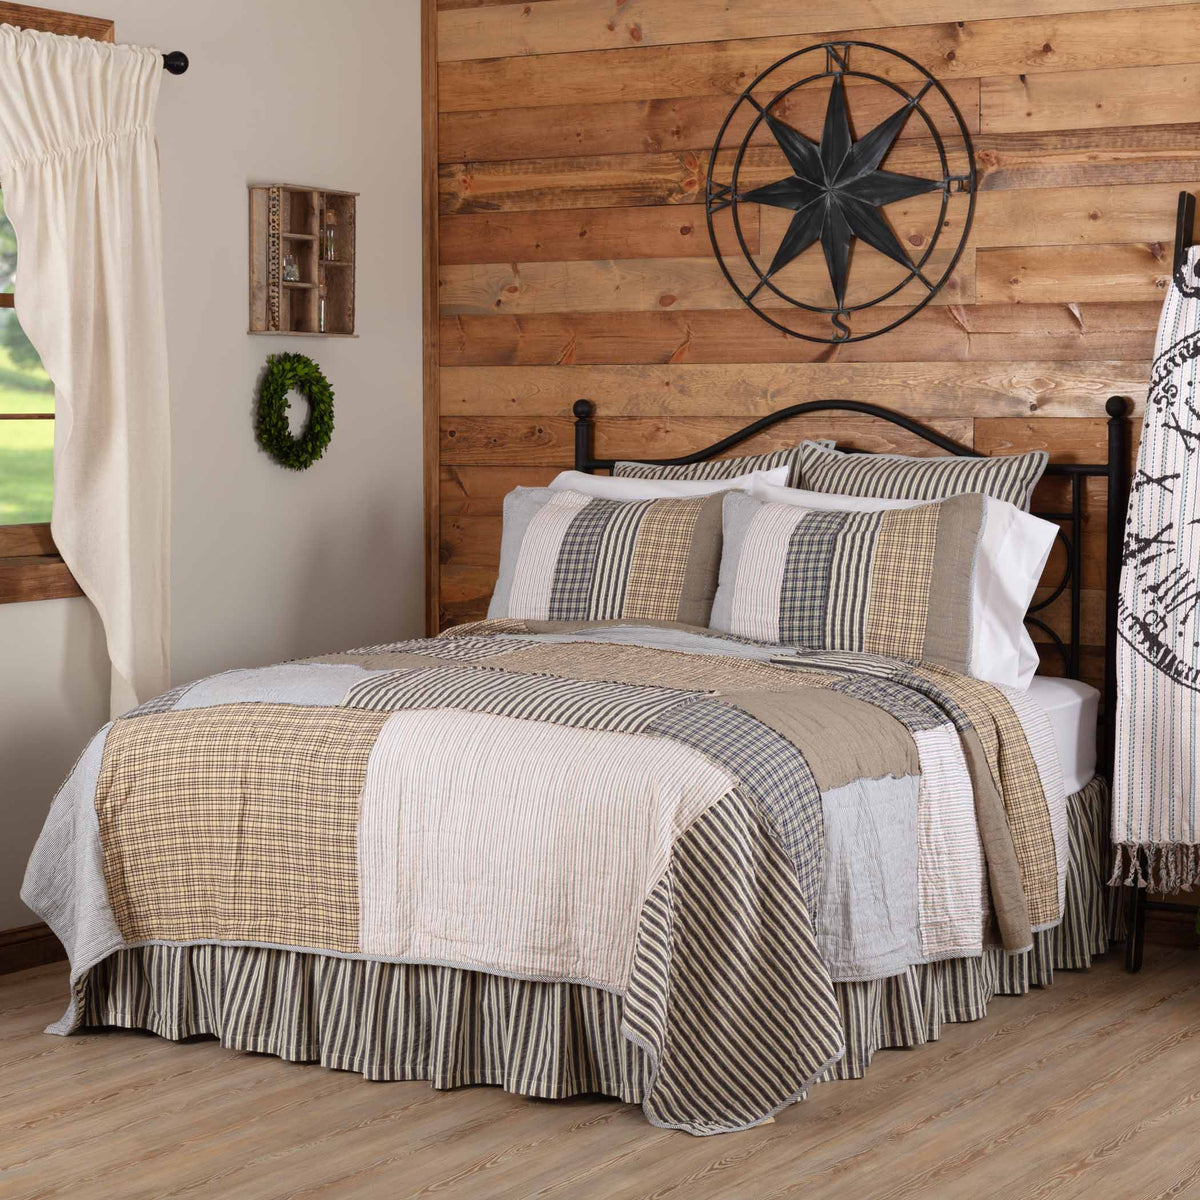 April & Olive Ashmont Luxury King Quilt 120Wx105L By VHC Brands